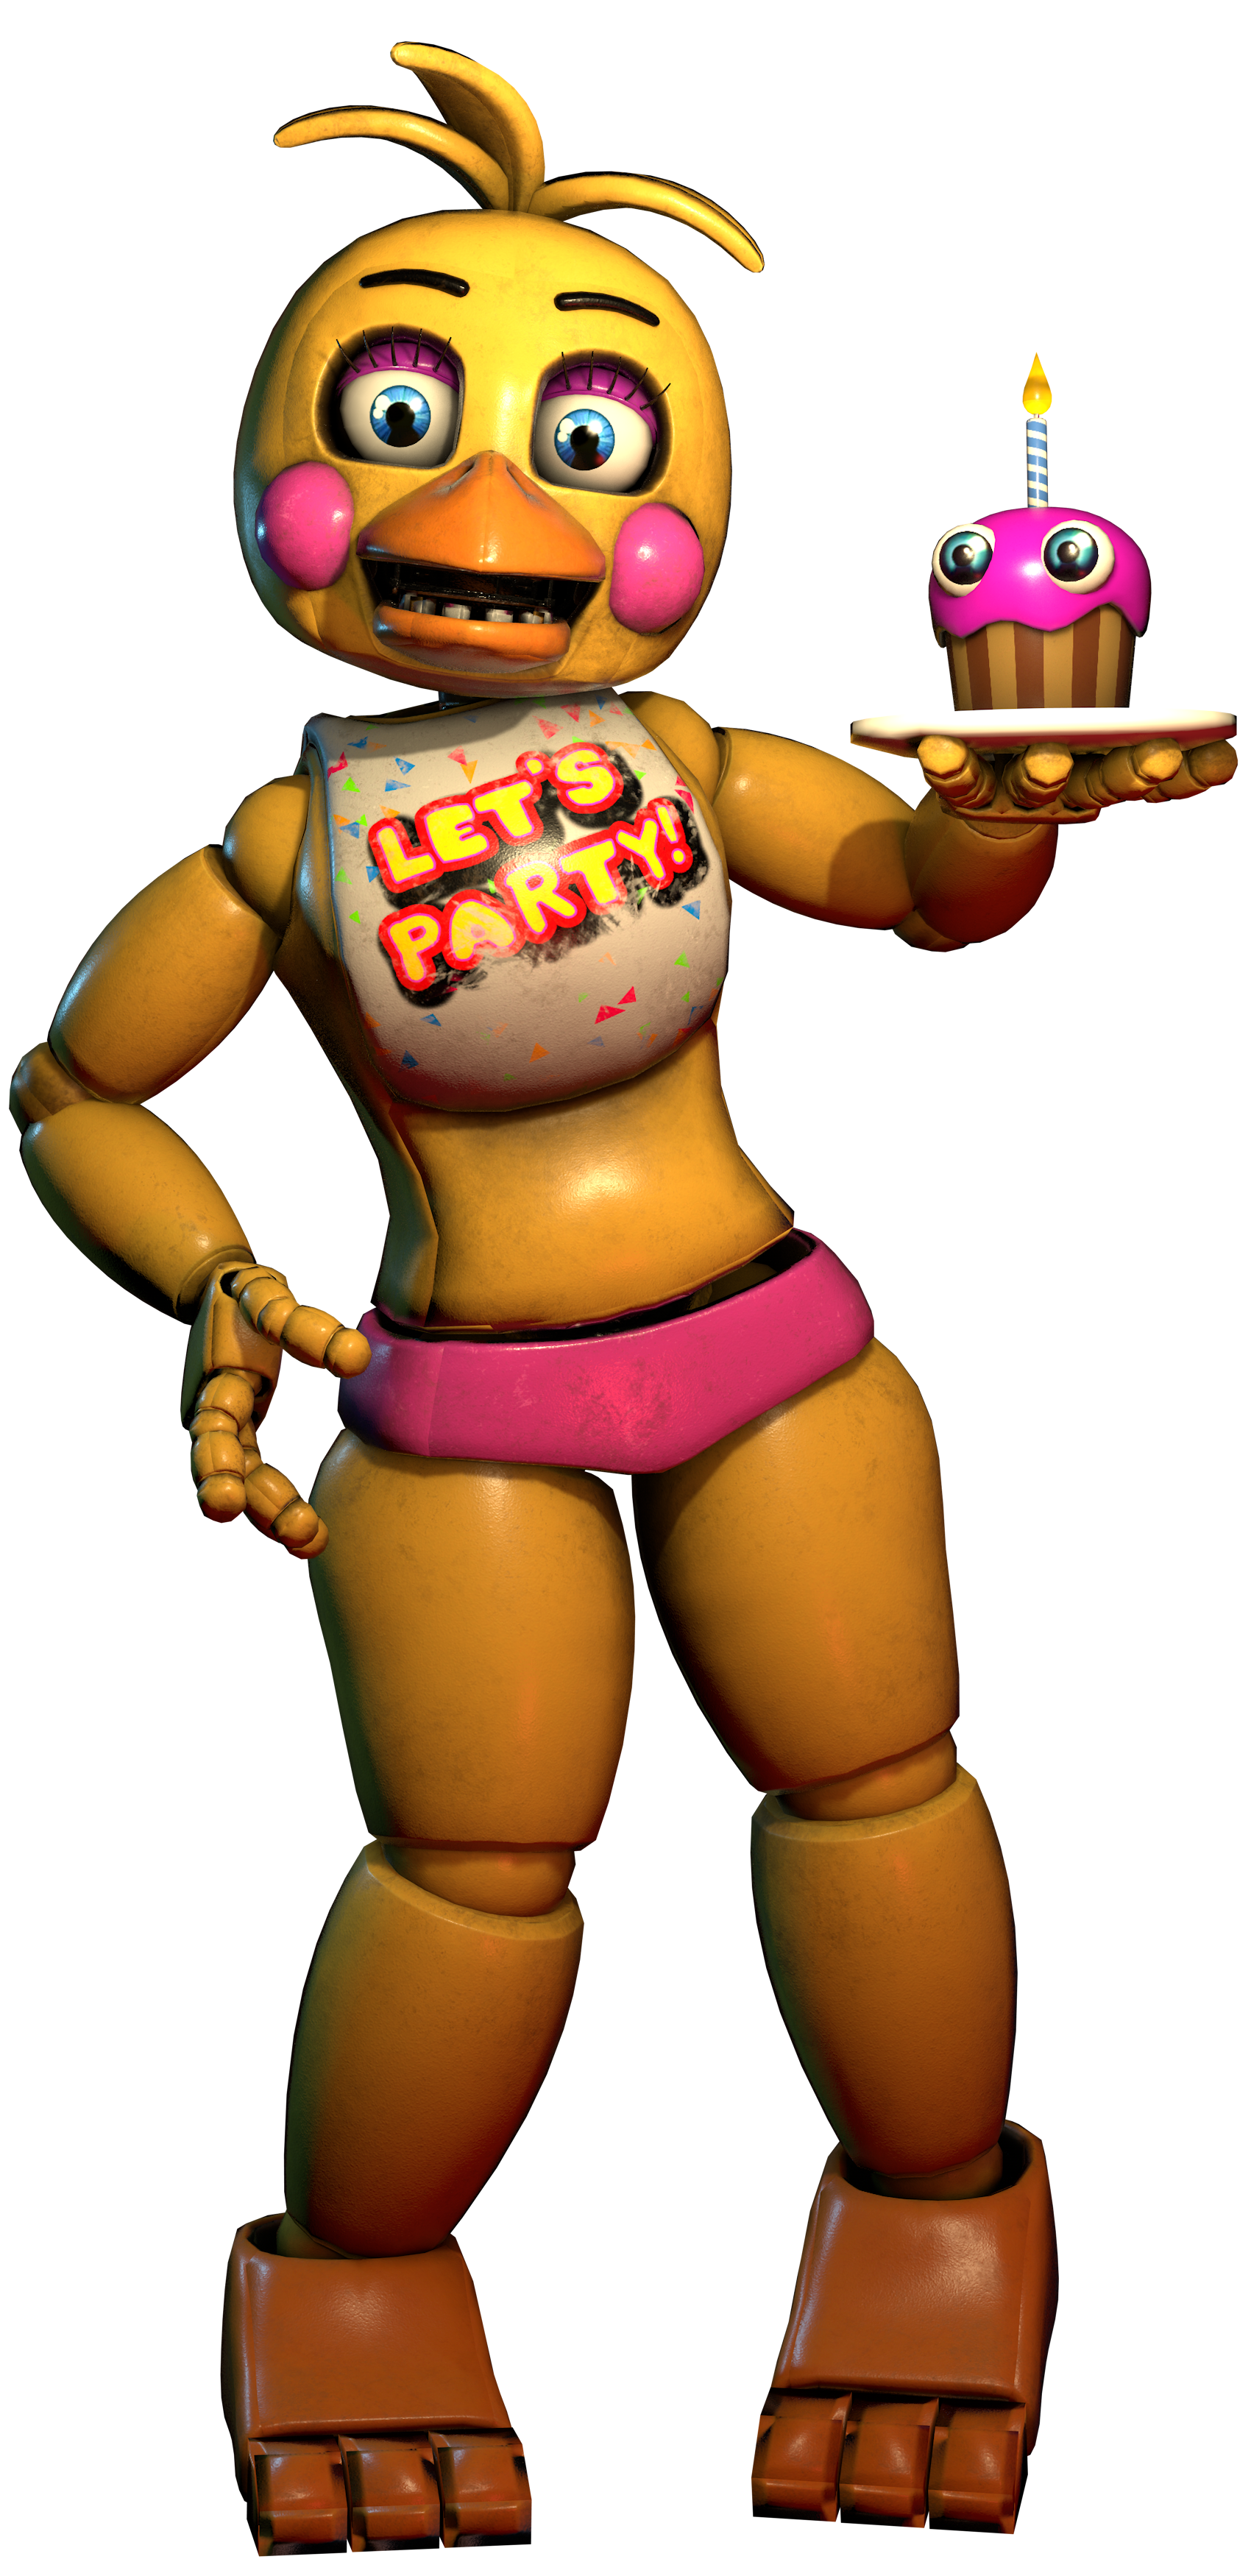 fnaf toy chica action figure